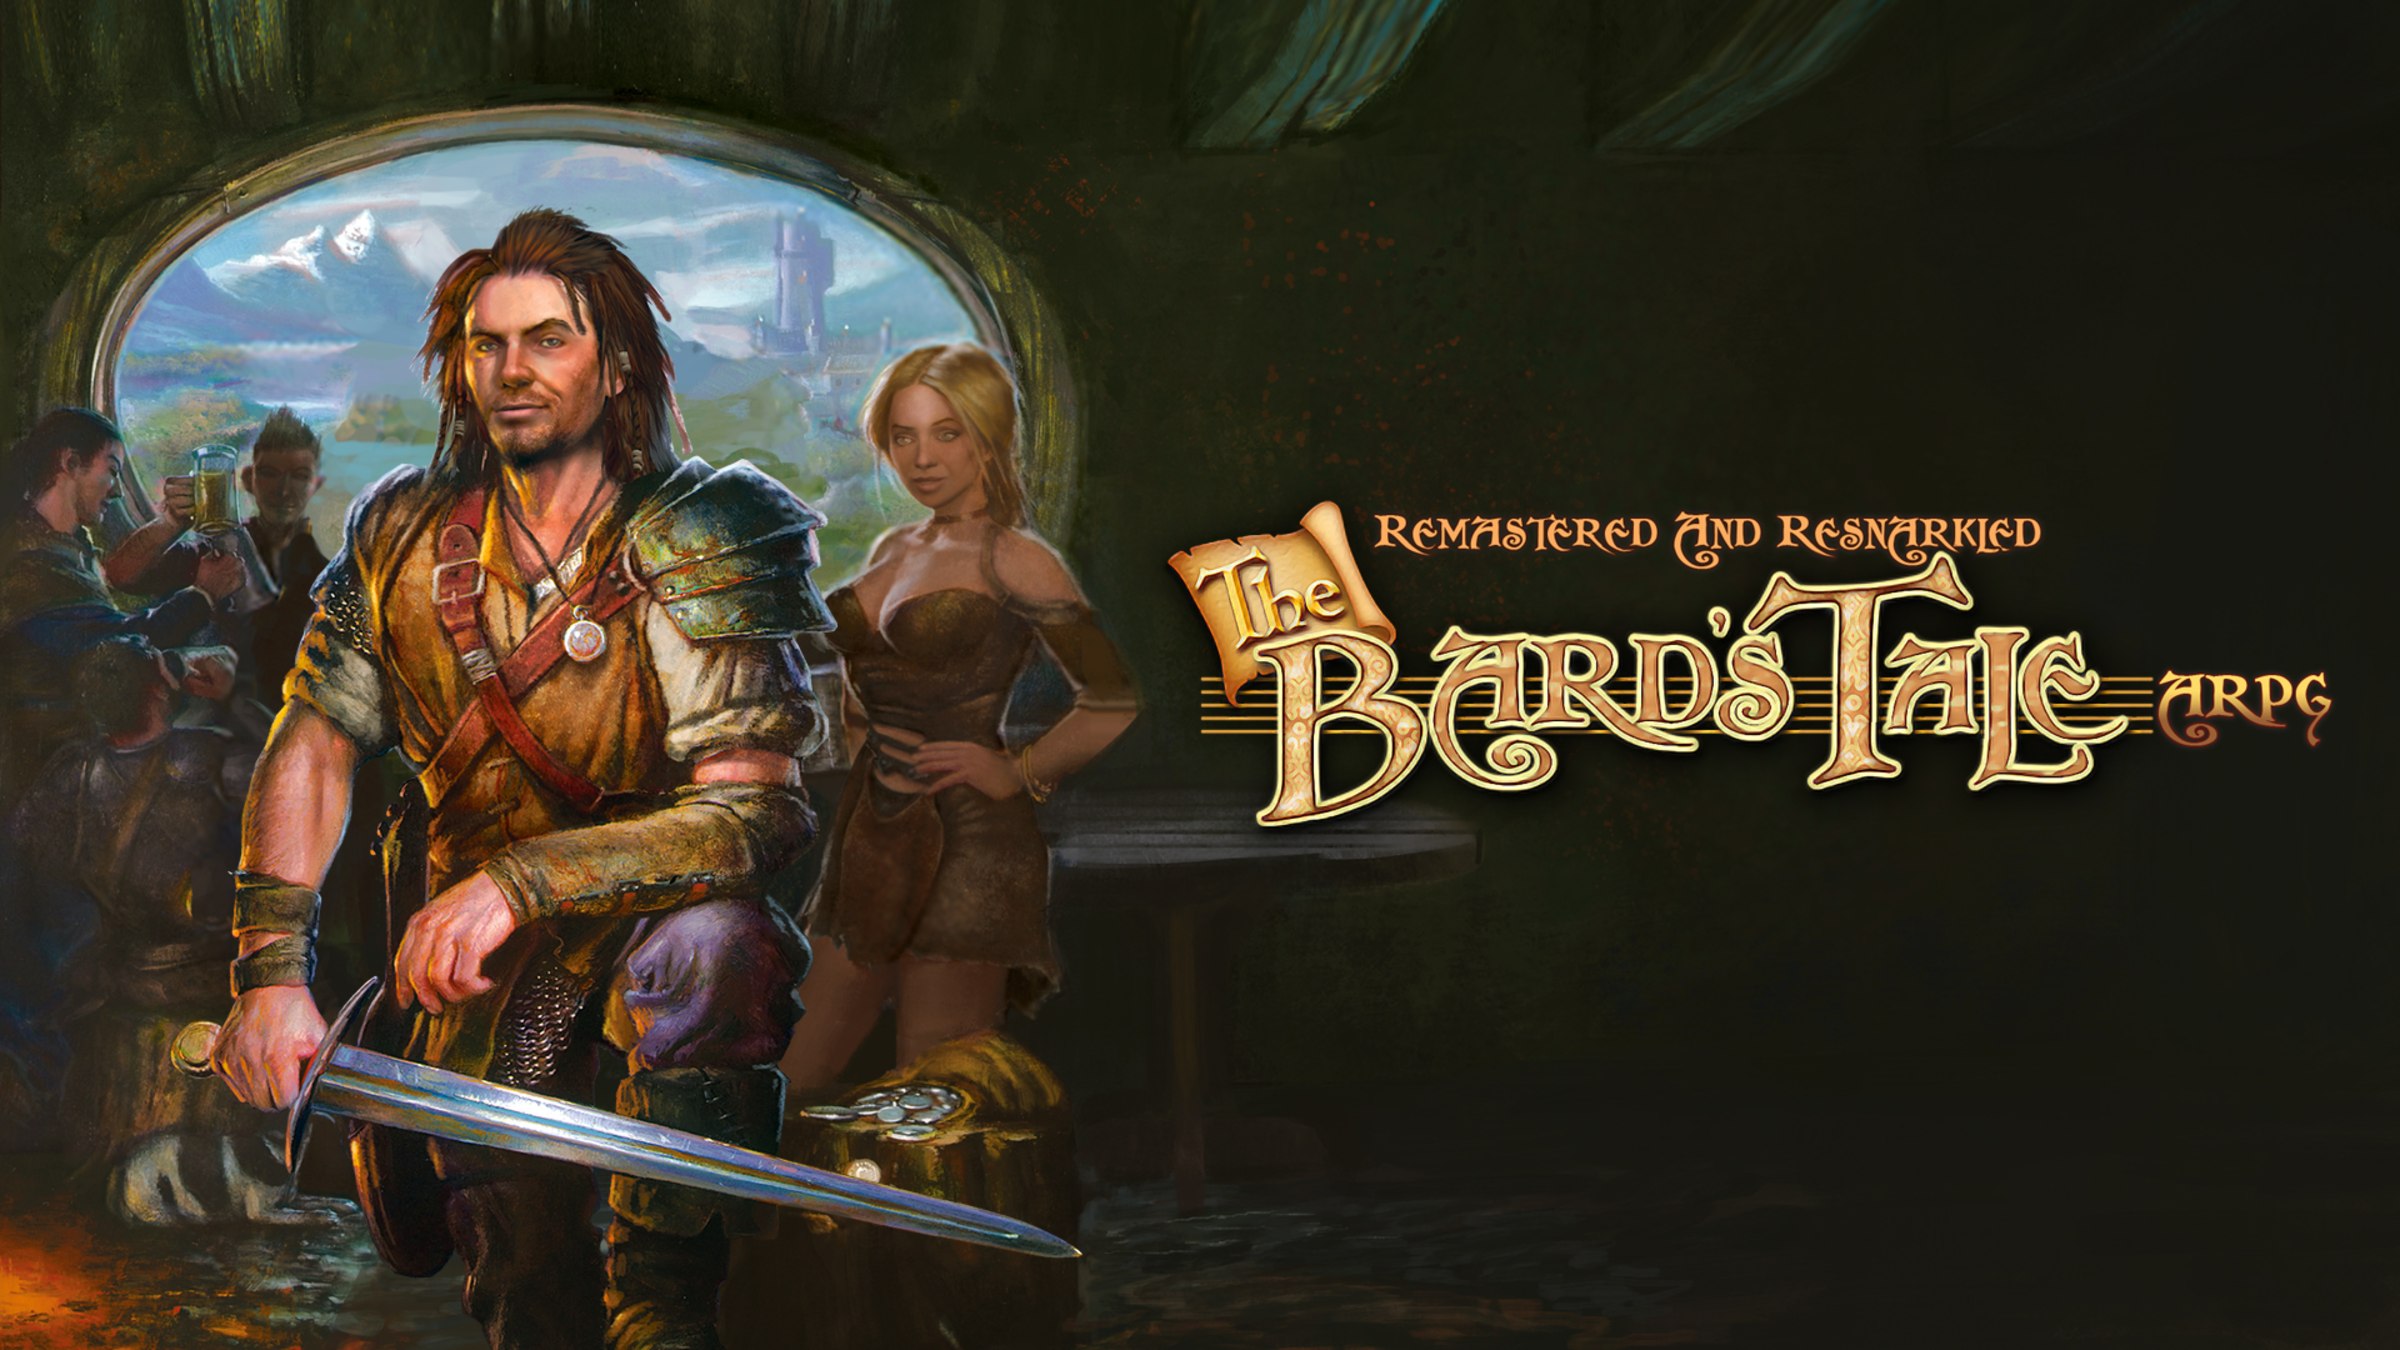  Bard''s Tale ARPG: Remastered and Resnarkled PS4 : Video Games